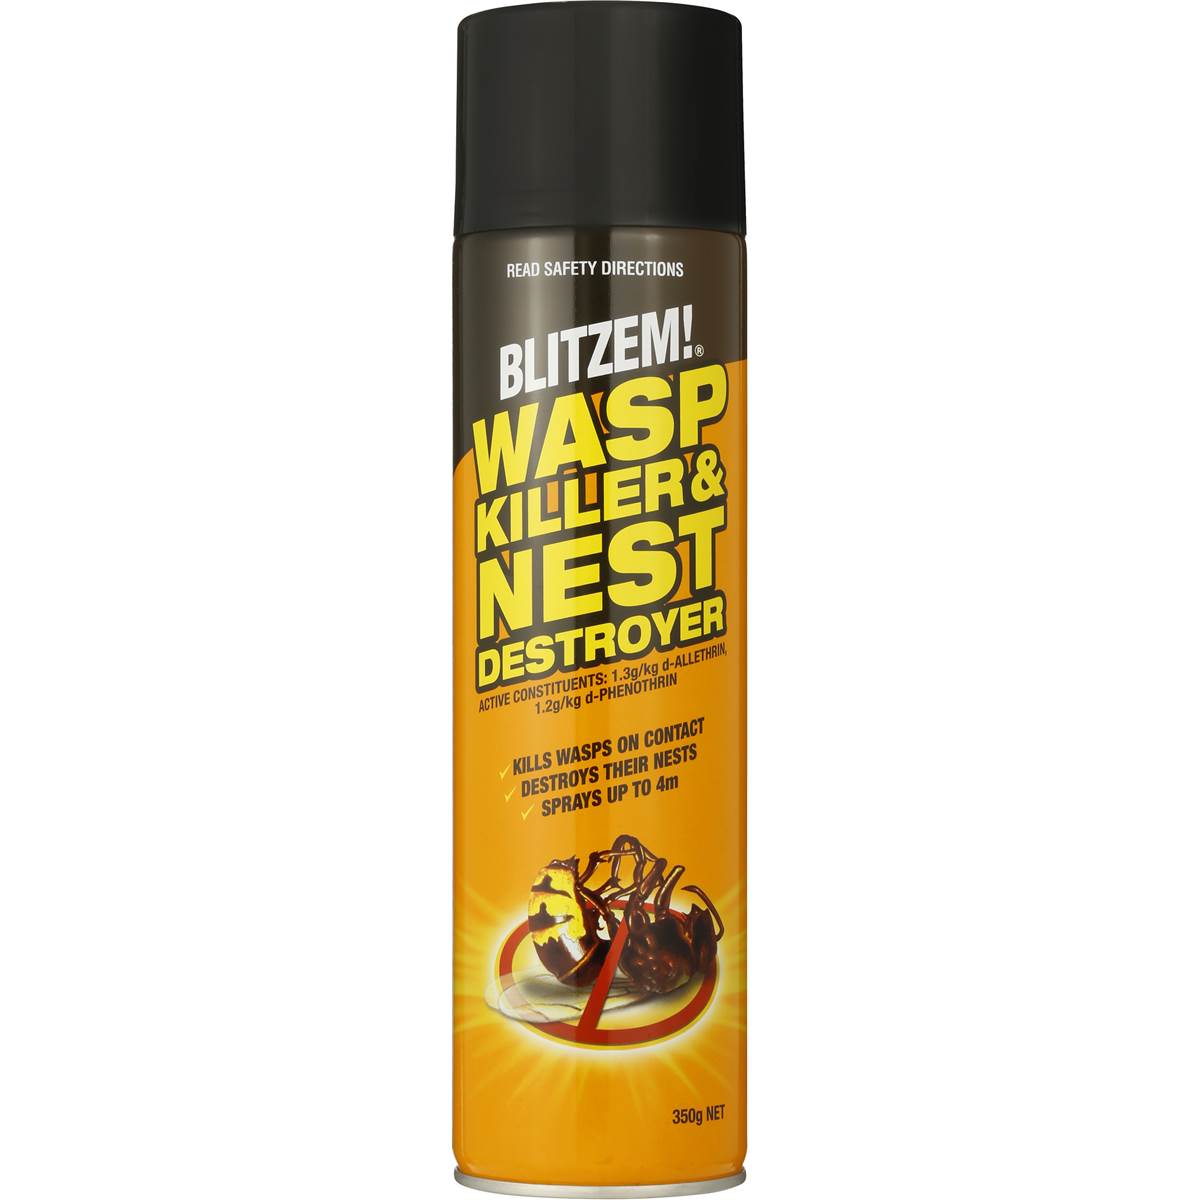 Blitzem Insect Control Wasp Nest Destroyer